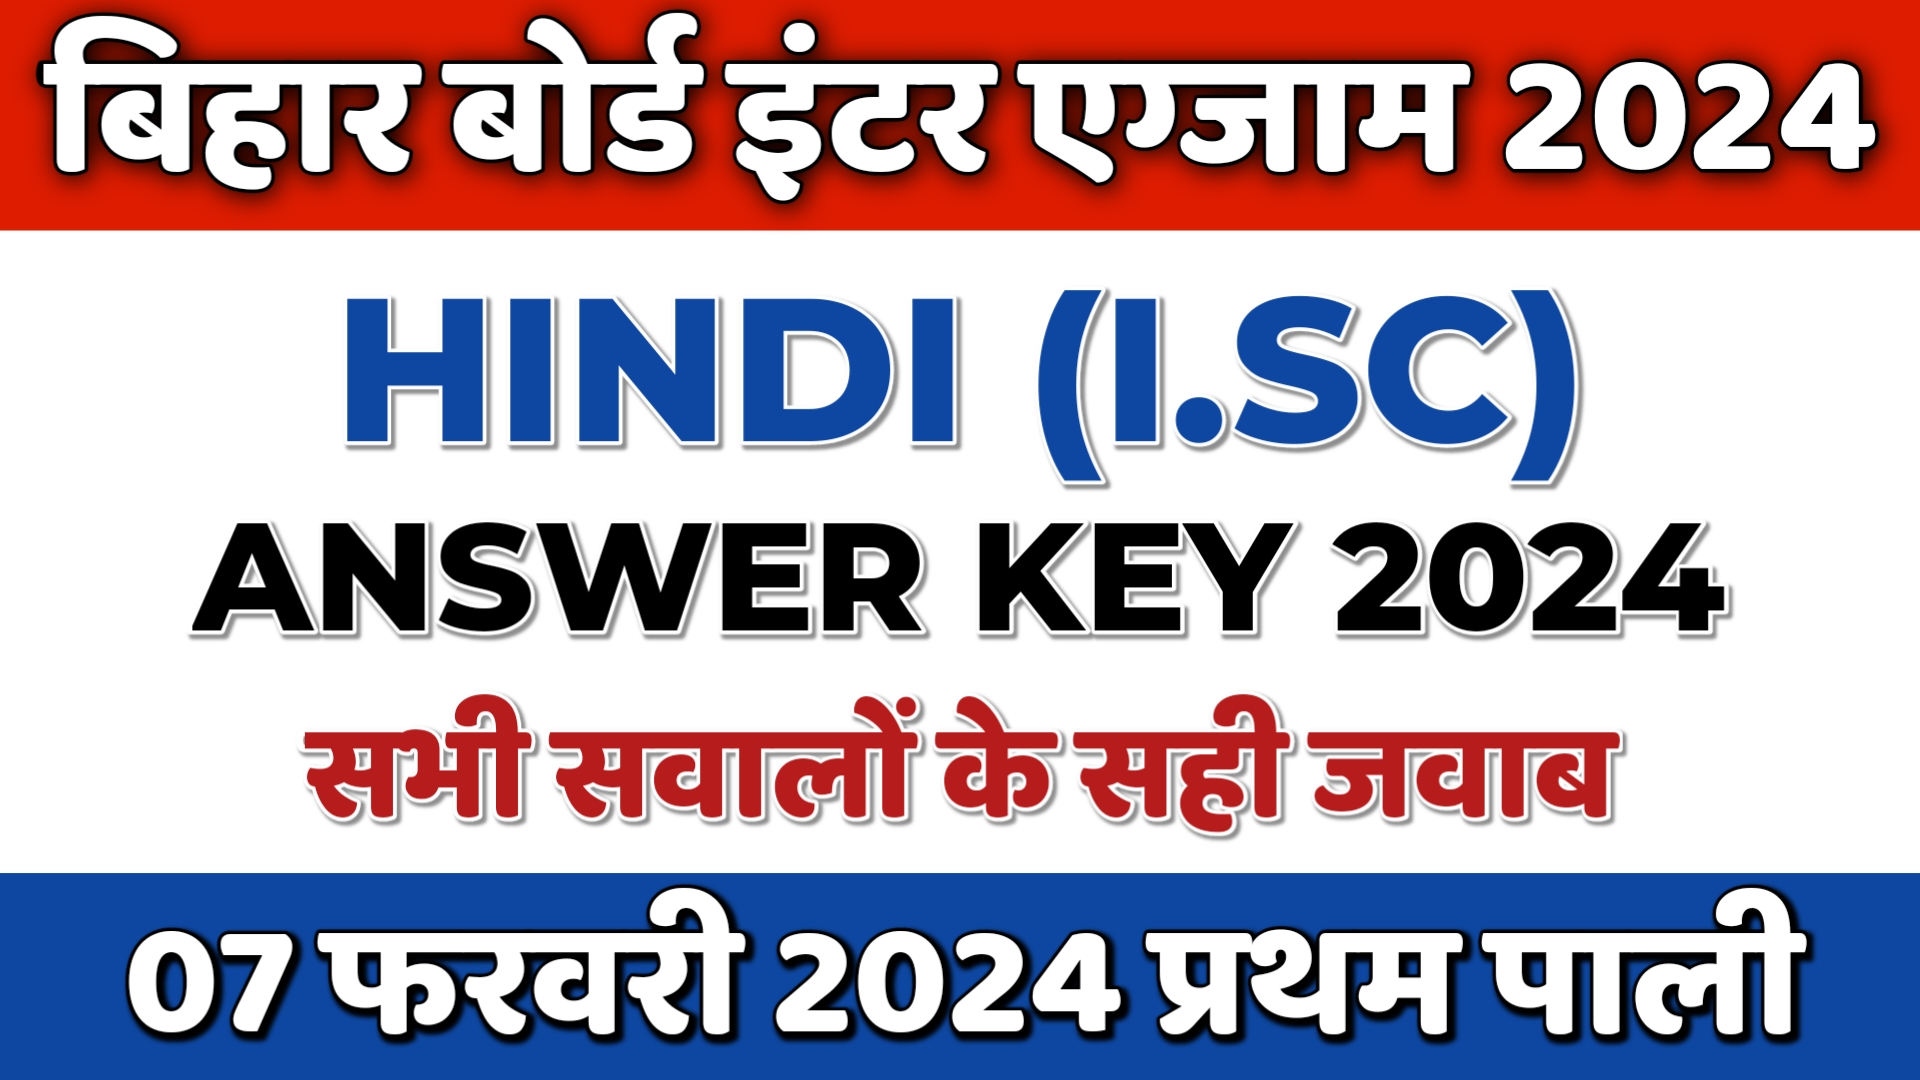 bihar board inter 12th Hindi isc answer key 2024 with question paper pdf